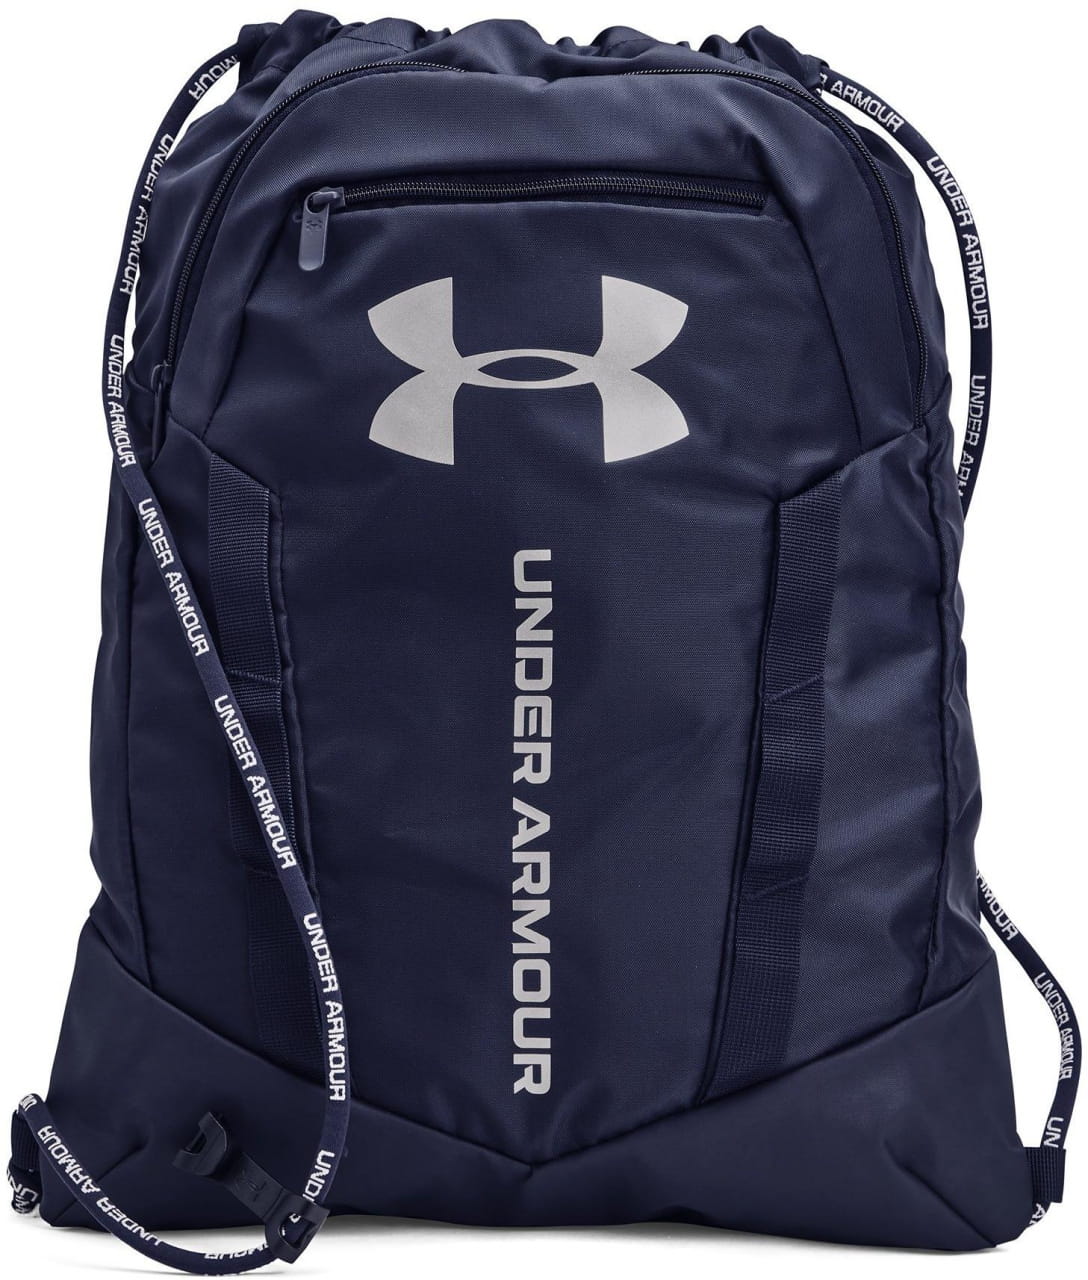 Sporttas Under Armour Undeniable Sackpack-NVY